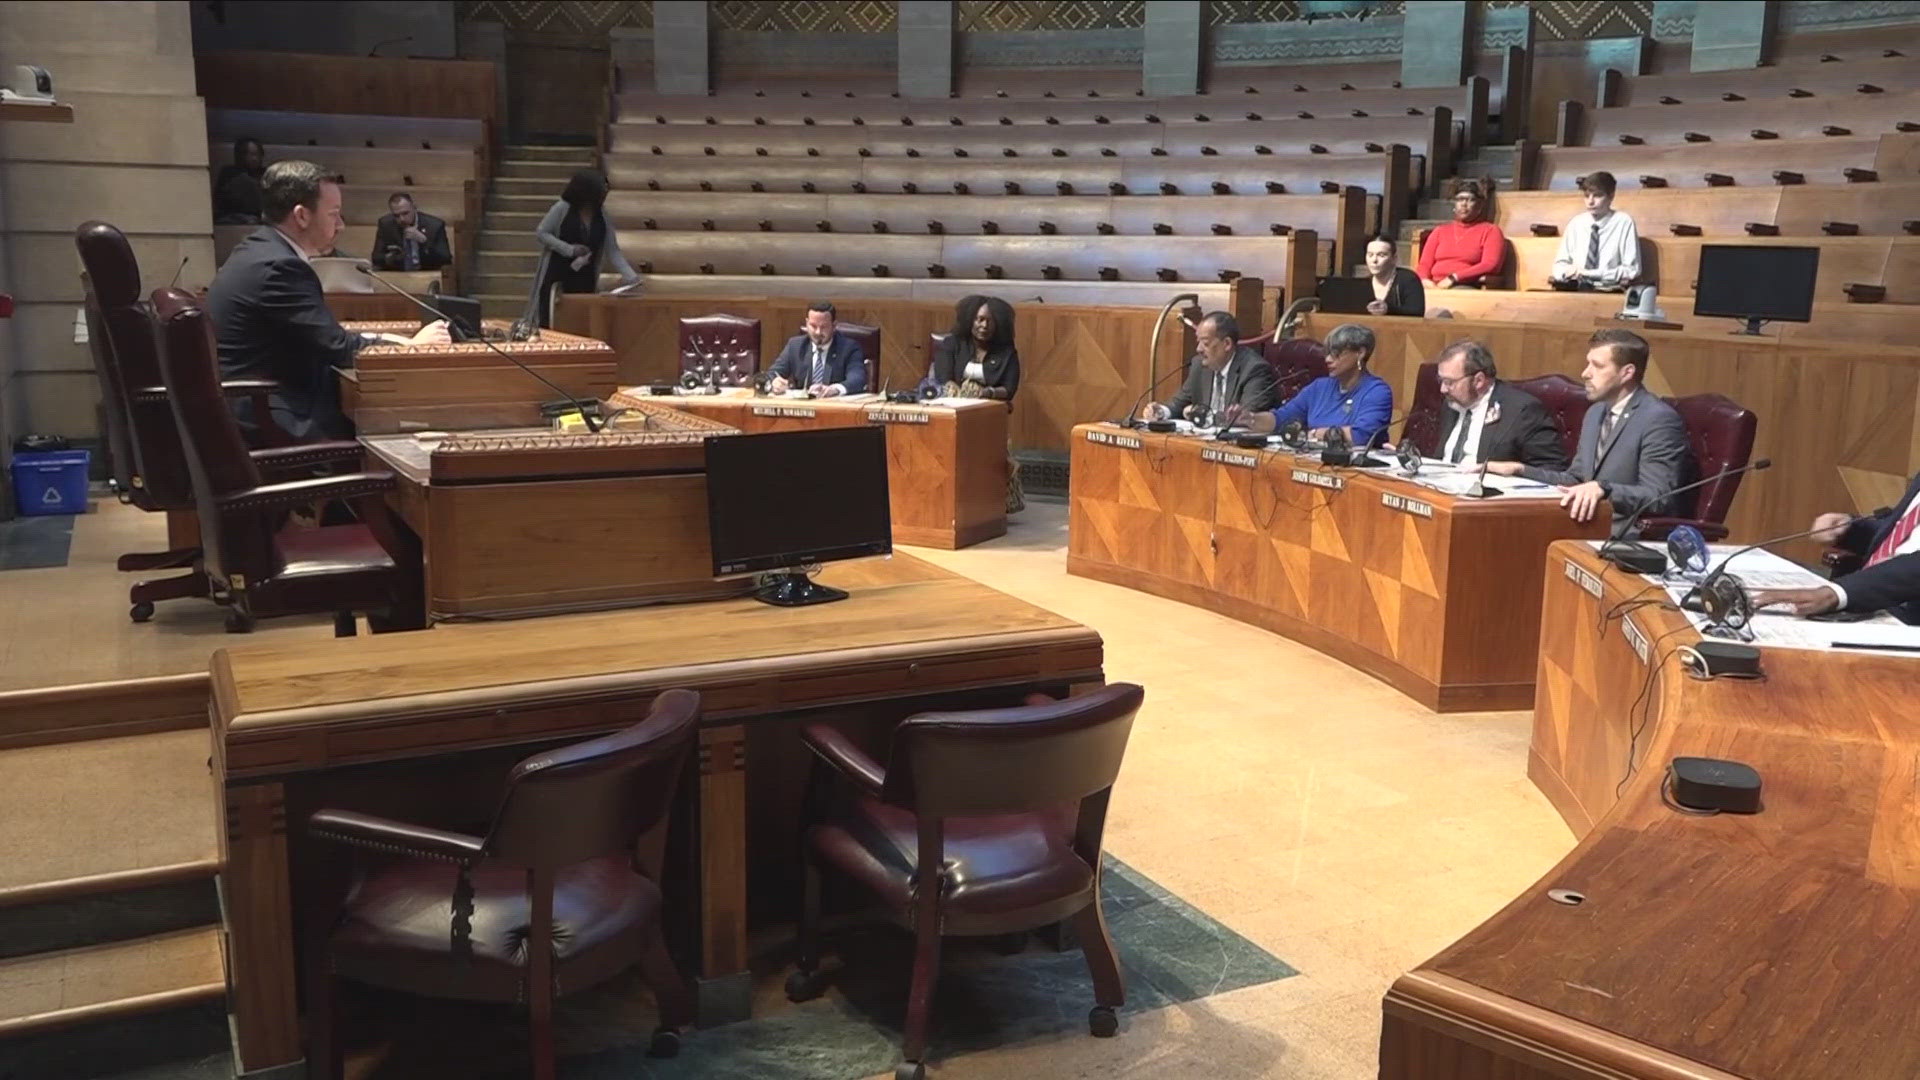 Much of the Common Council says some sort of increase may have to happen but whether or not the budget is amended will depend if some cuts can be made.